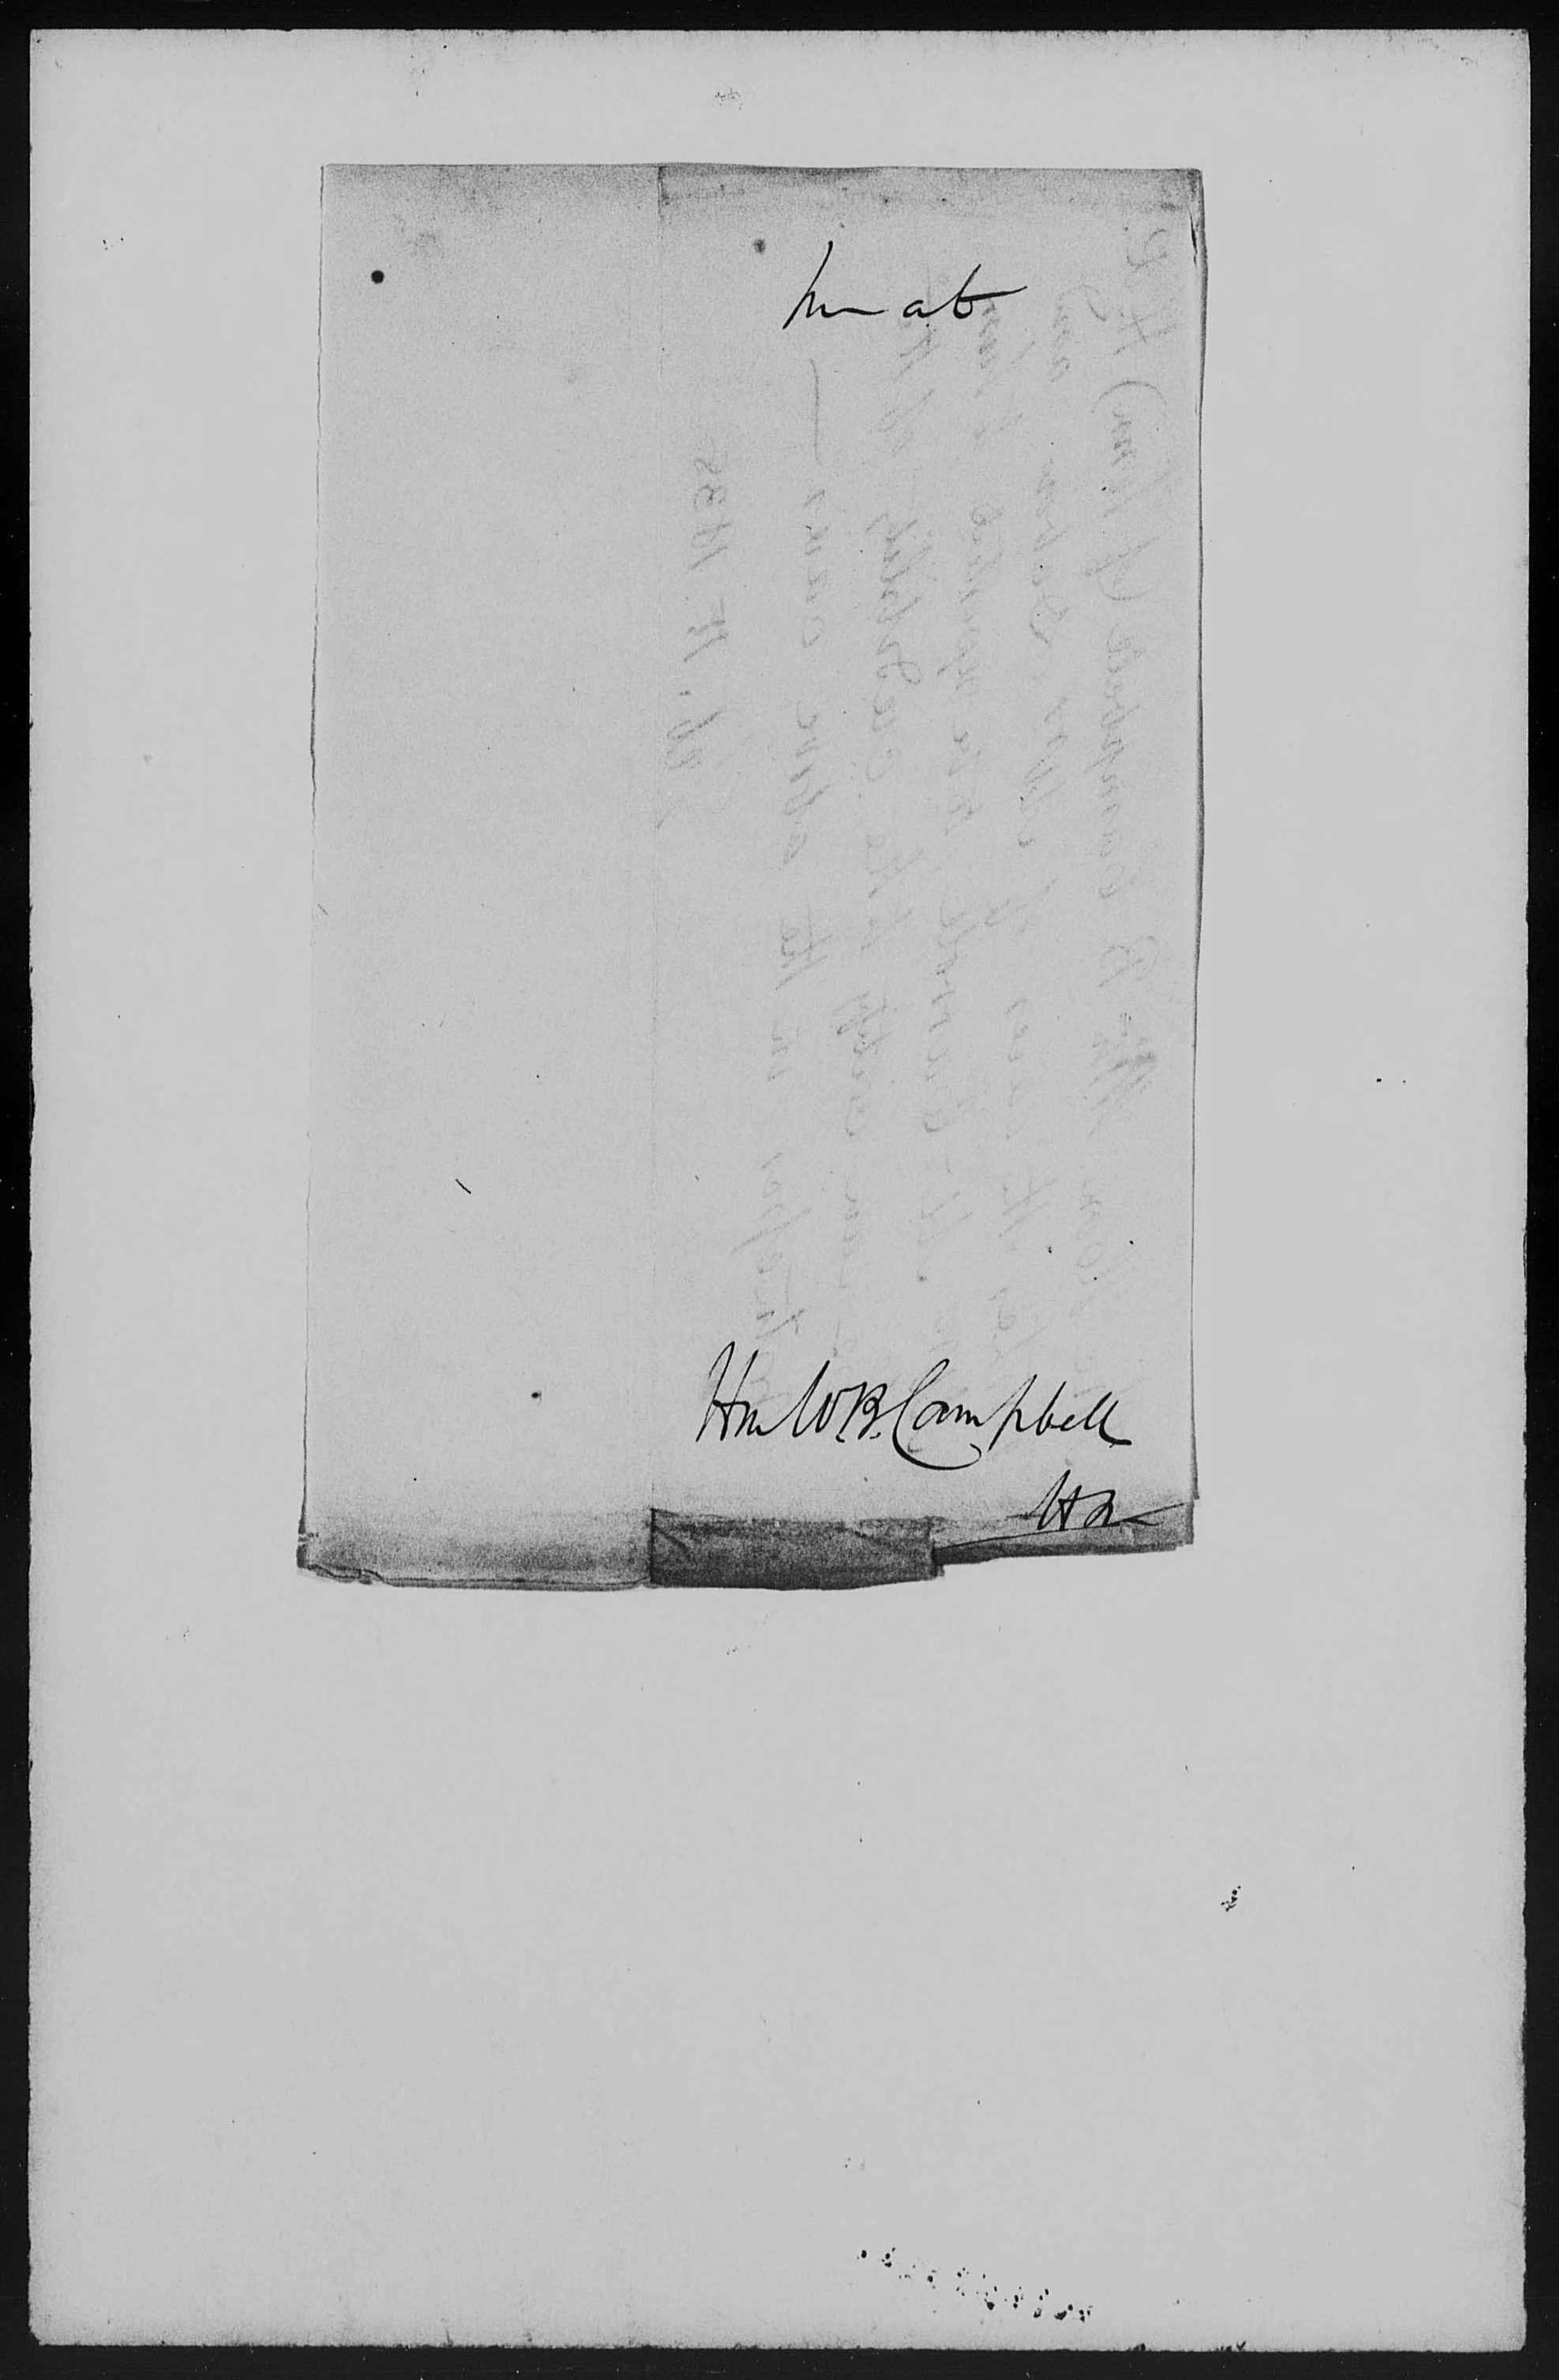 Order from William B. Campbell on the Pension Claim of Rachel Debow, 15 February 1838, page 2